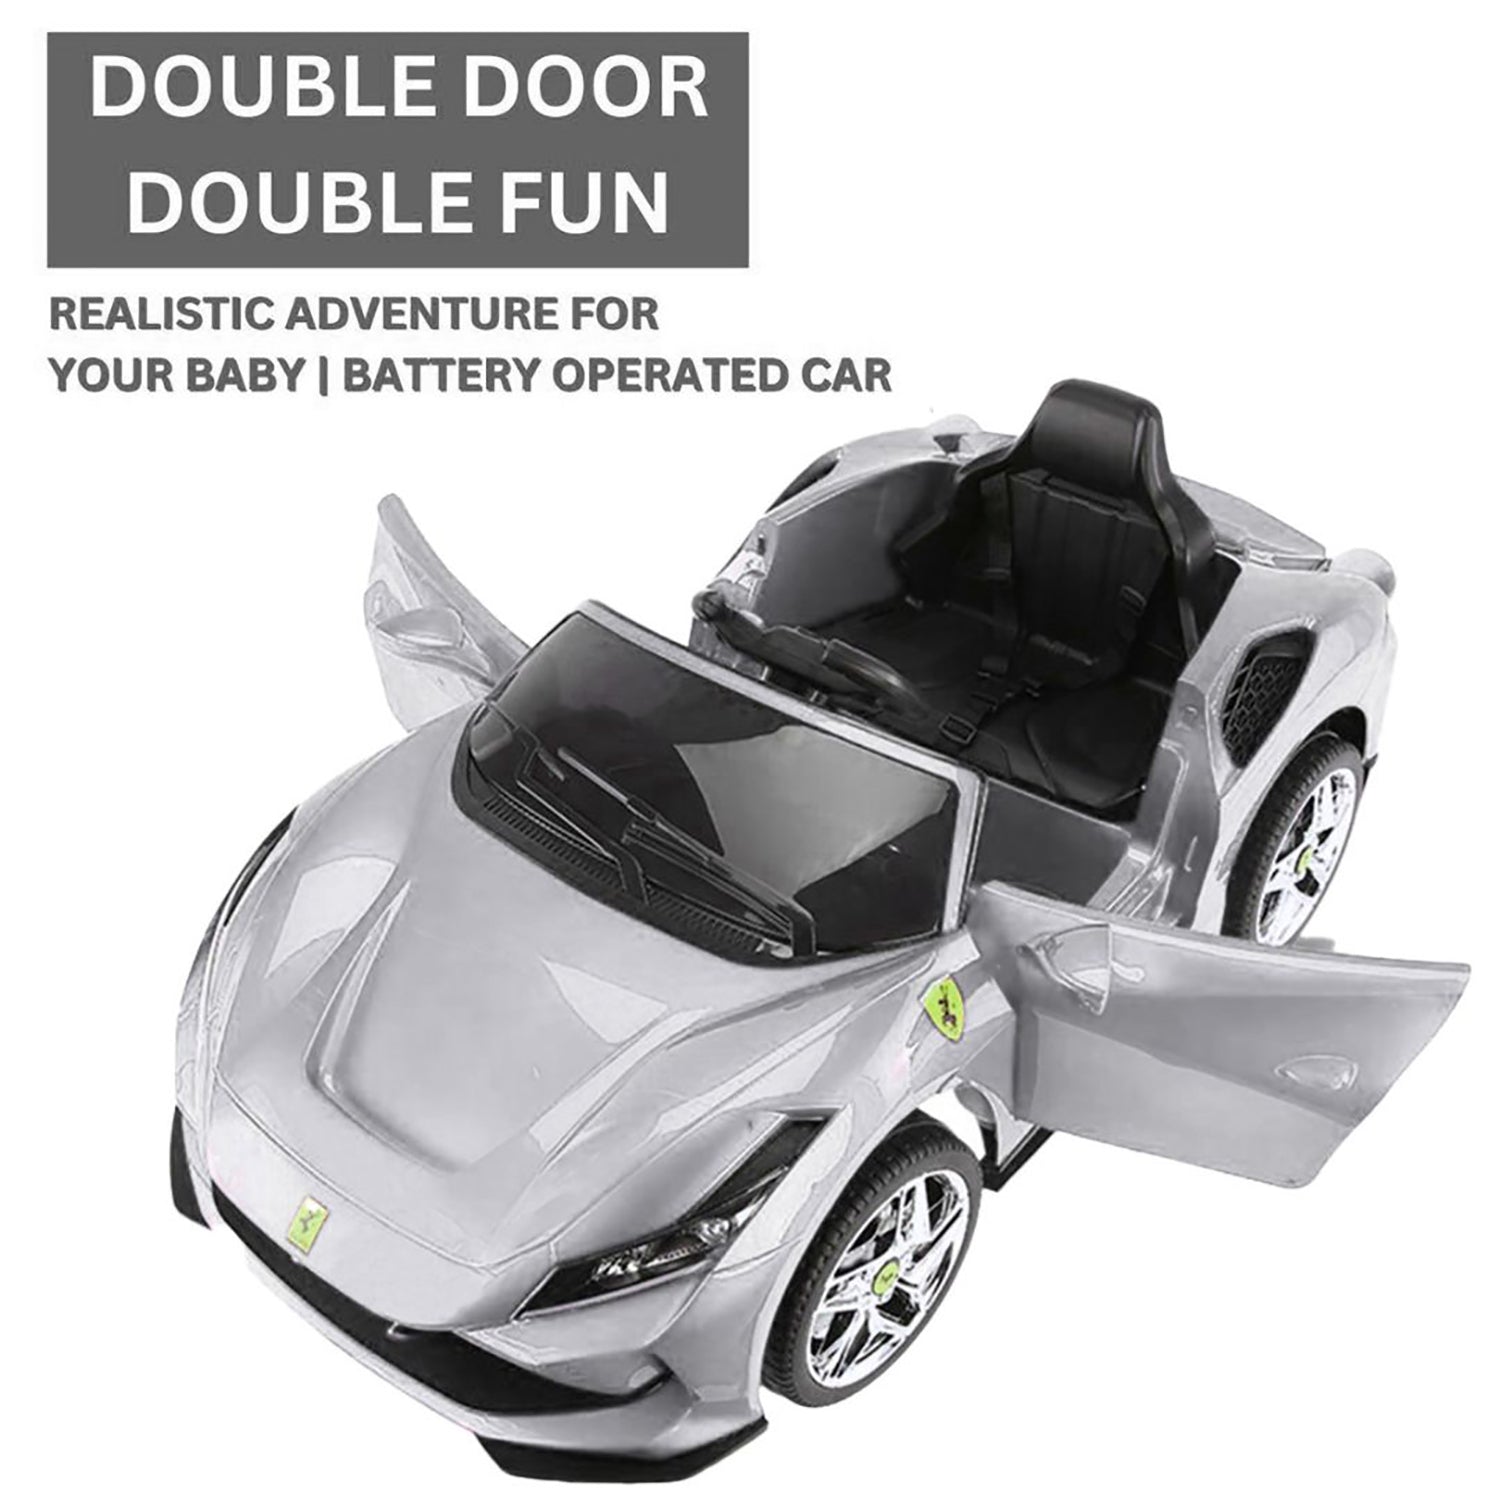 Baby Moo Ferrari F8 12V Battery Operated Ride On Car for Kids | Electric Car with Remote Control | Rechargeable Battery-Powered Toy with LED Lights, Music & USB Port | Age 2-8 - Silver